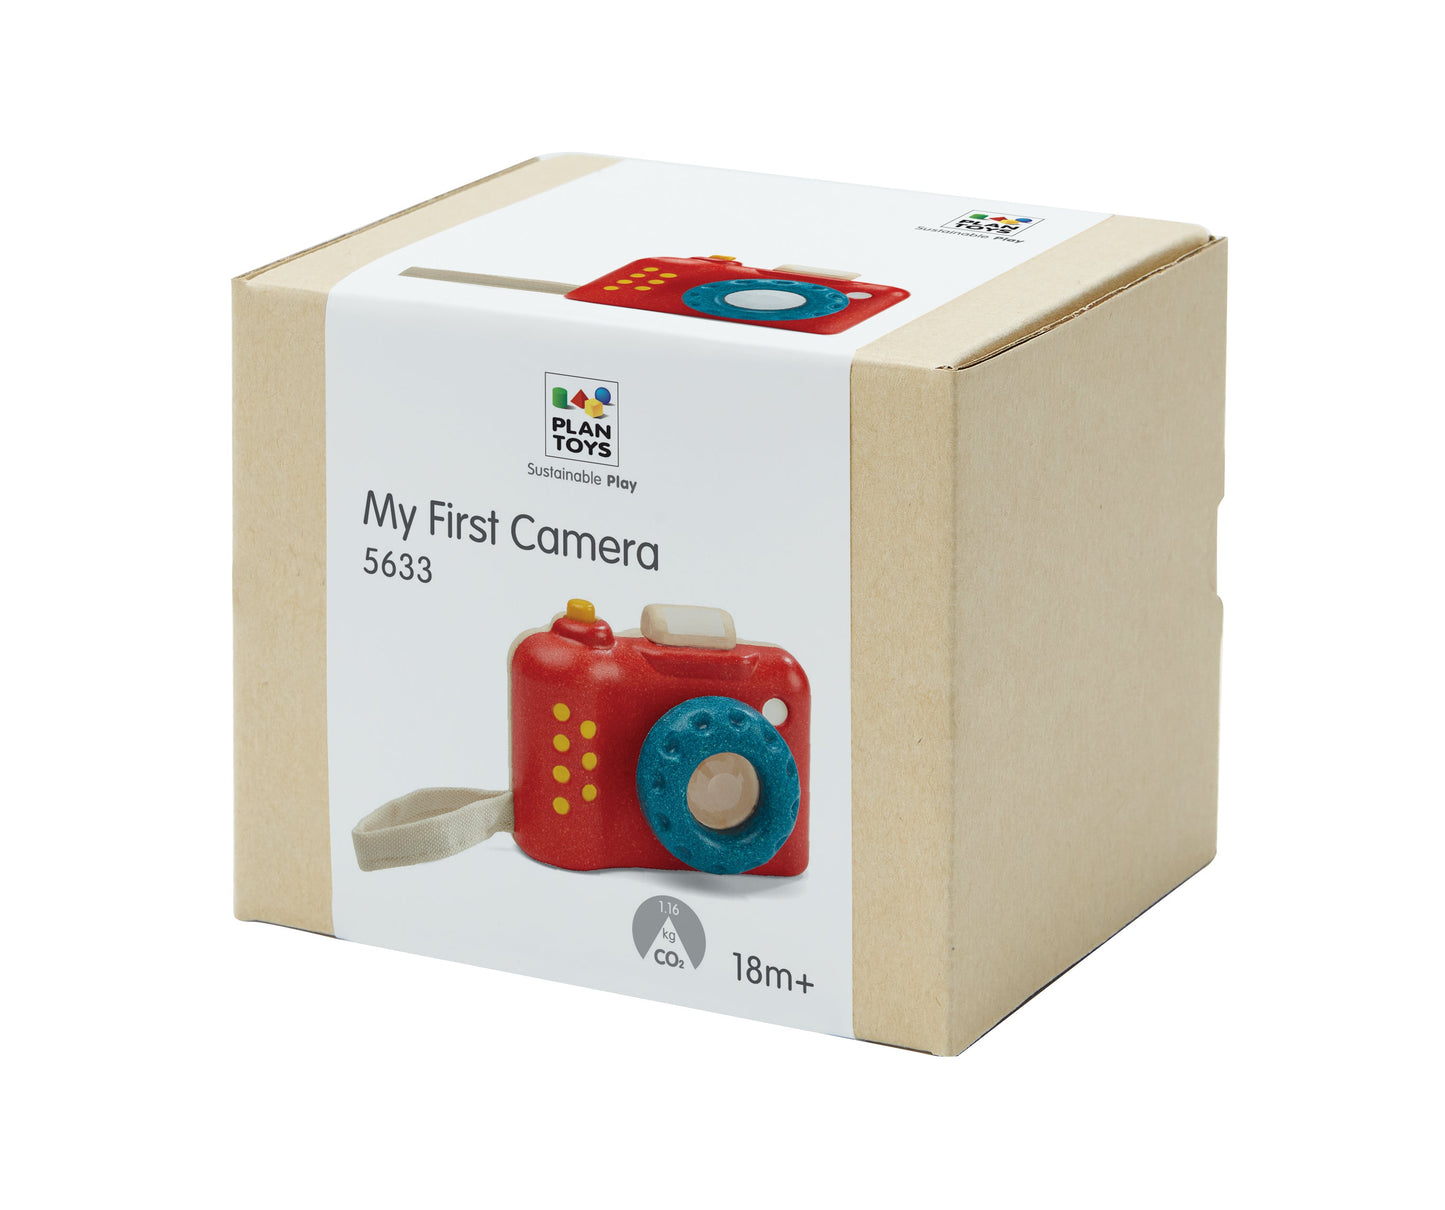 Load image into Gallery viewer, The recyclable box the camera is packaged in.
